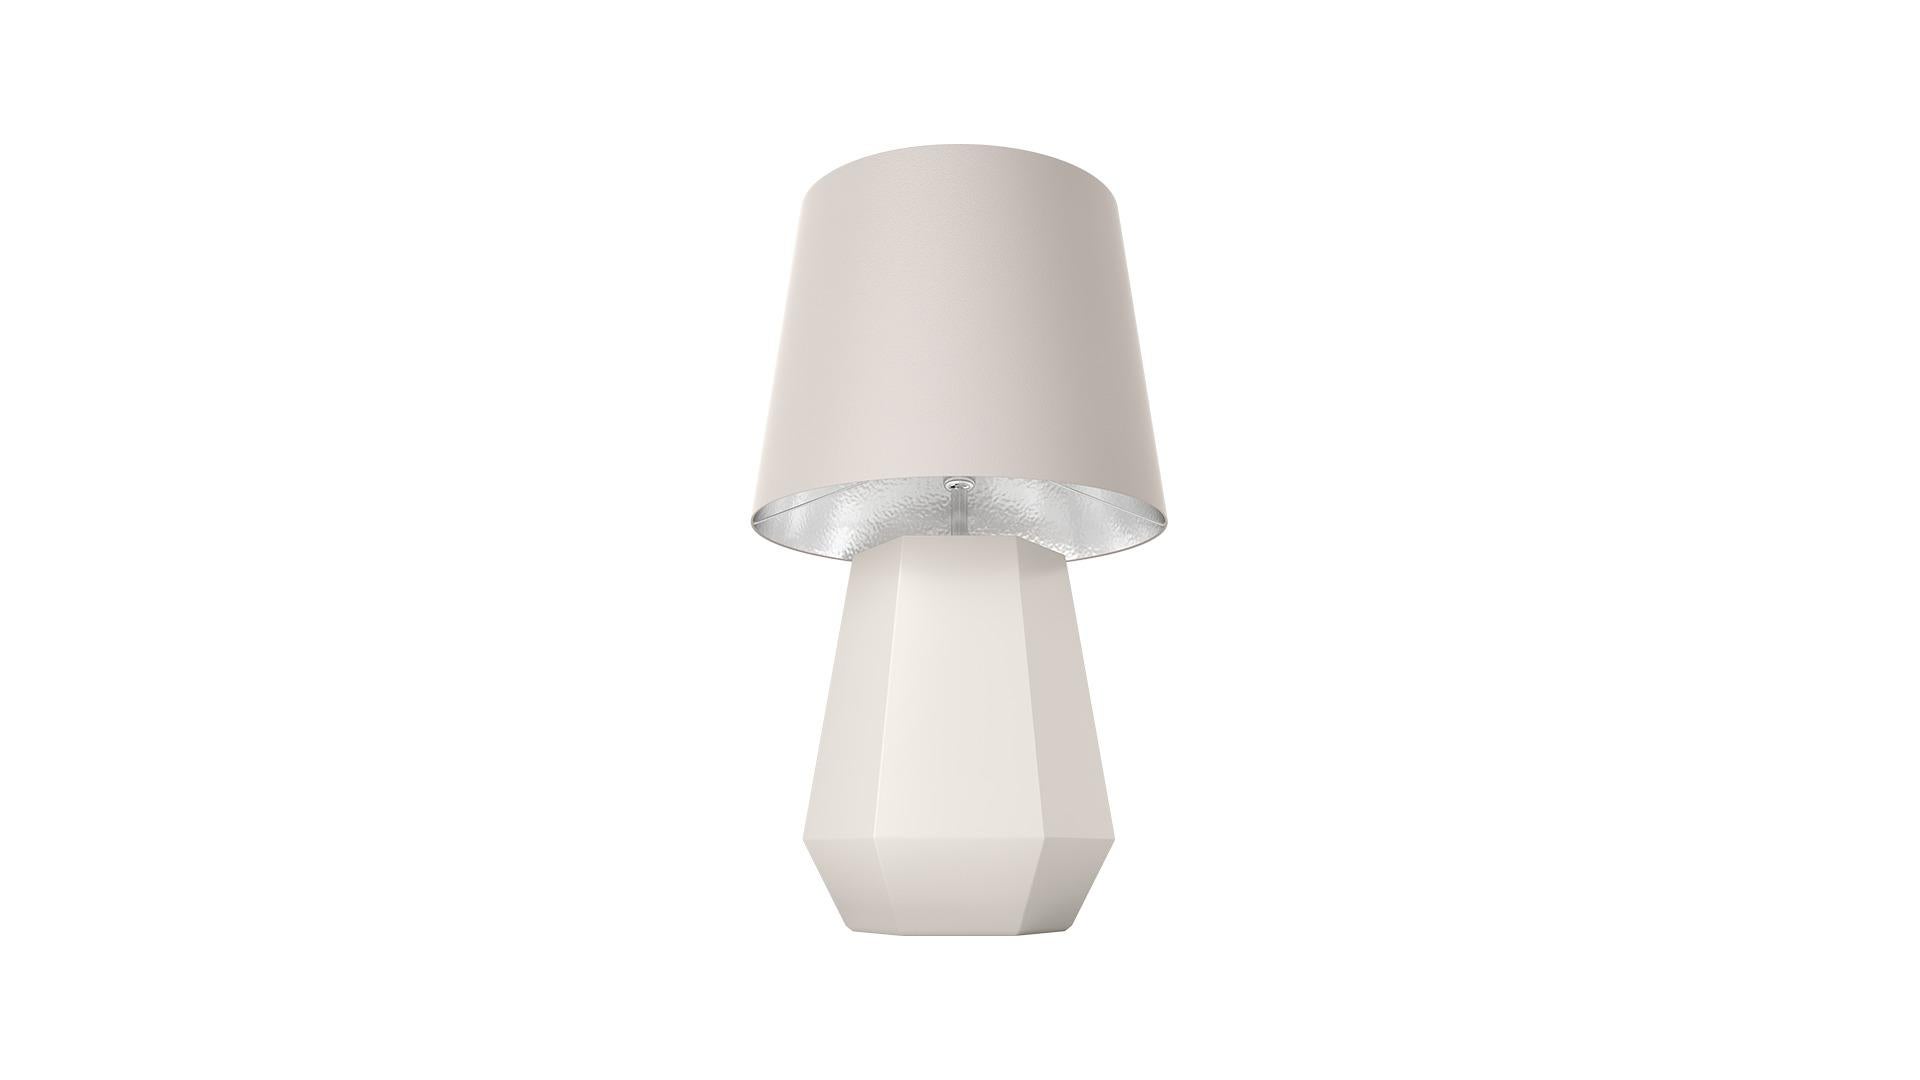 Moss table lamp

Structure closed pore glossy lacquered wood
Details polished stainless steel

Conical shade 
Satin exterior

Overall dimensions
480x480x860 mm

Structure dimensions
350x300x530 mm

Lampshade dimensions
Ø480xØ380x380